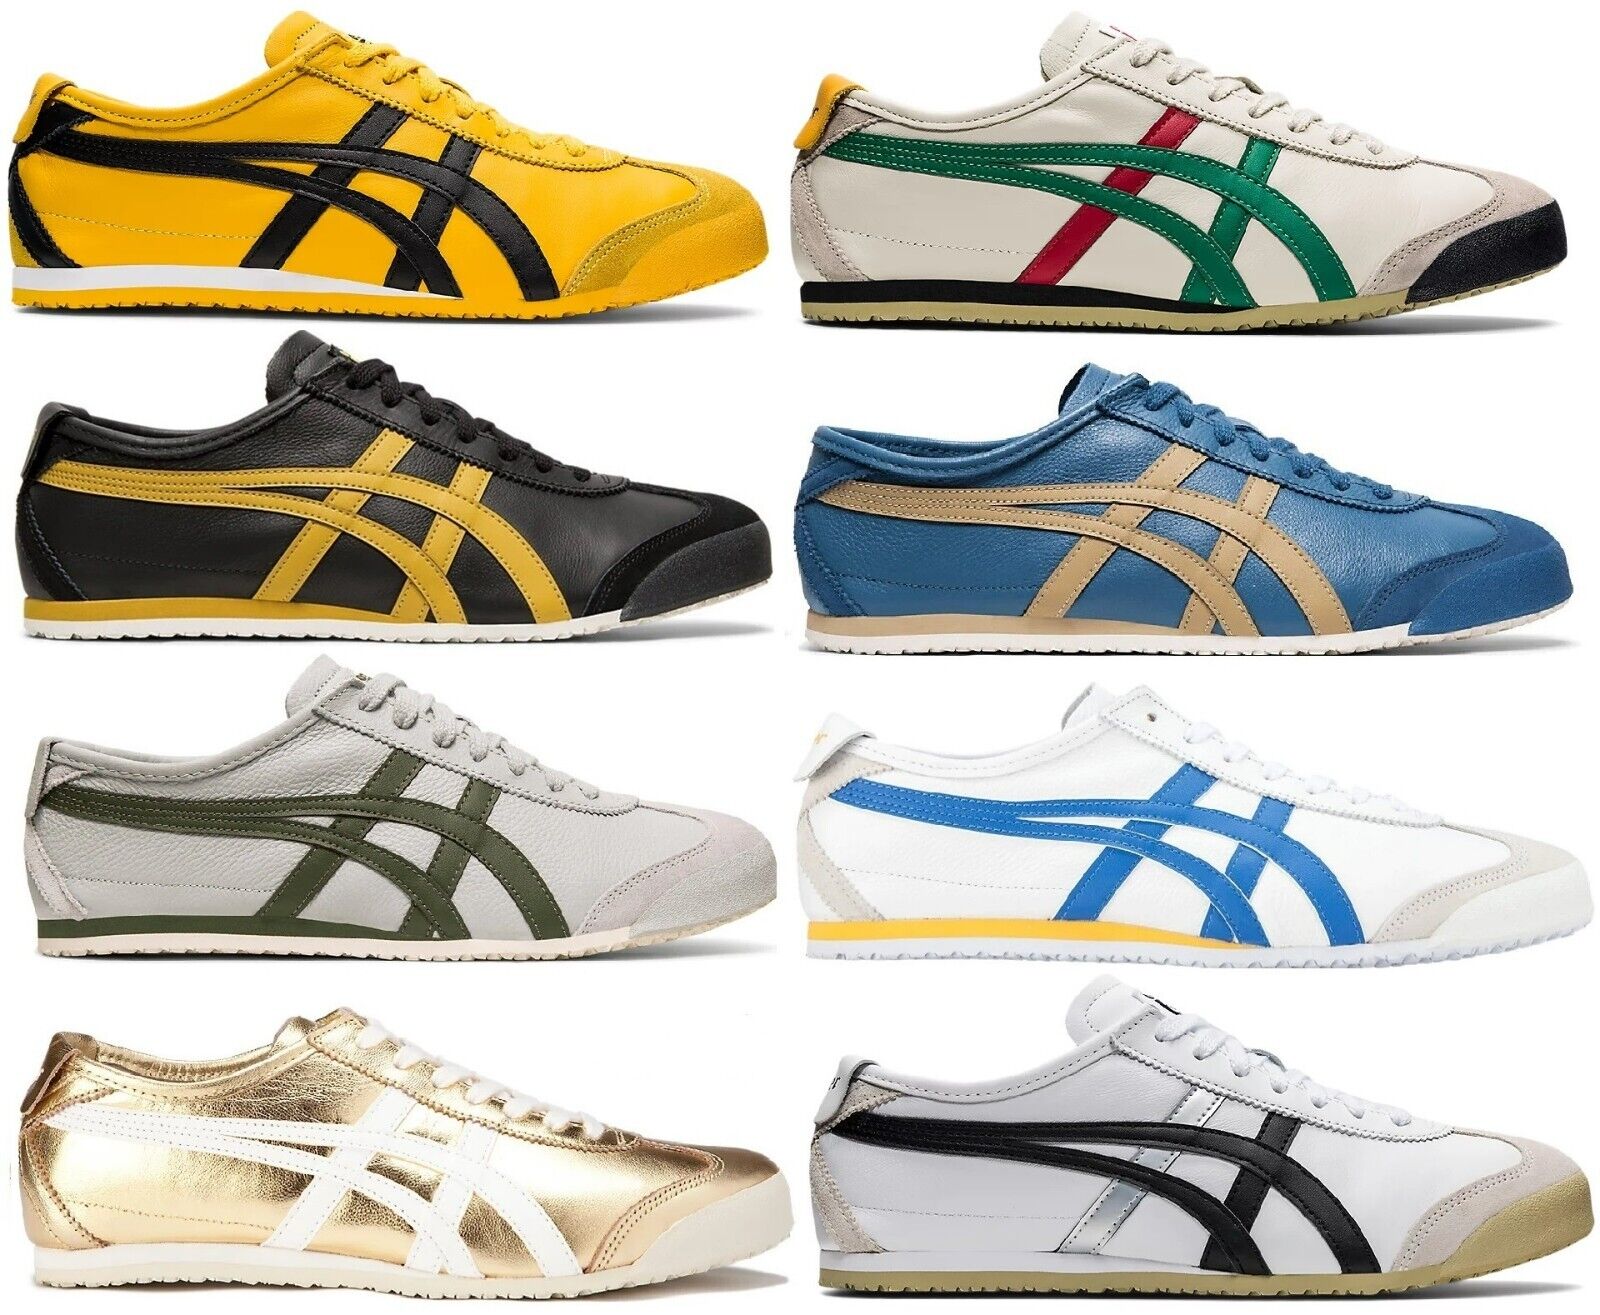 Looking to Buy Onitsuka Tiger Shoes for Women. Find the Best Styles and Models Here